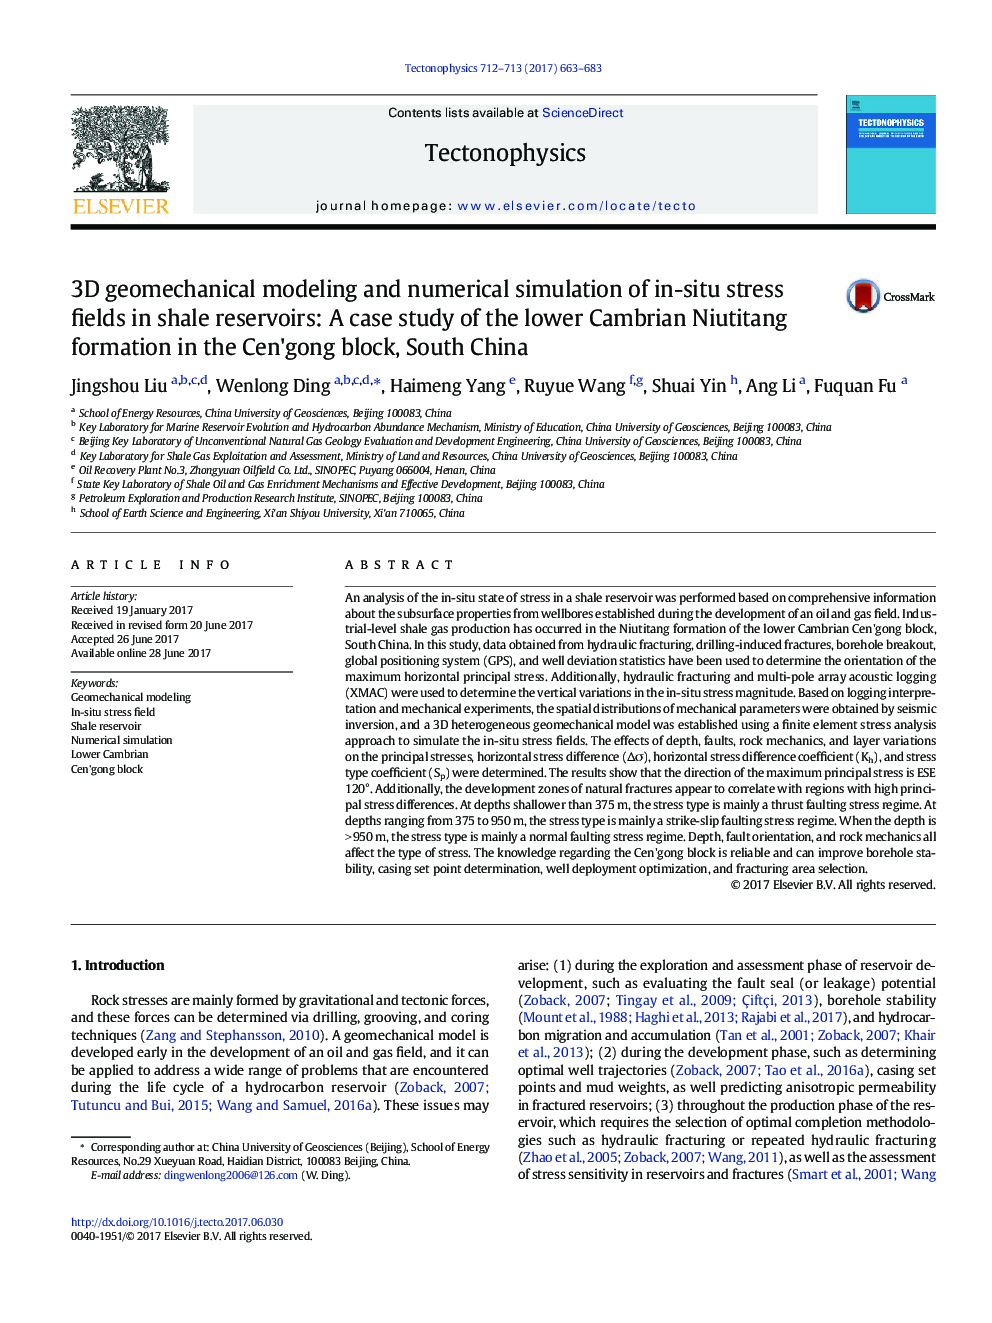 3D geomechanical modeling and numerical simulation of in-situ stress fields in shale reservoirs: A case study of the lower Cambrian Niutitang formation in the Cen'gong block, South China